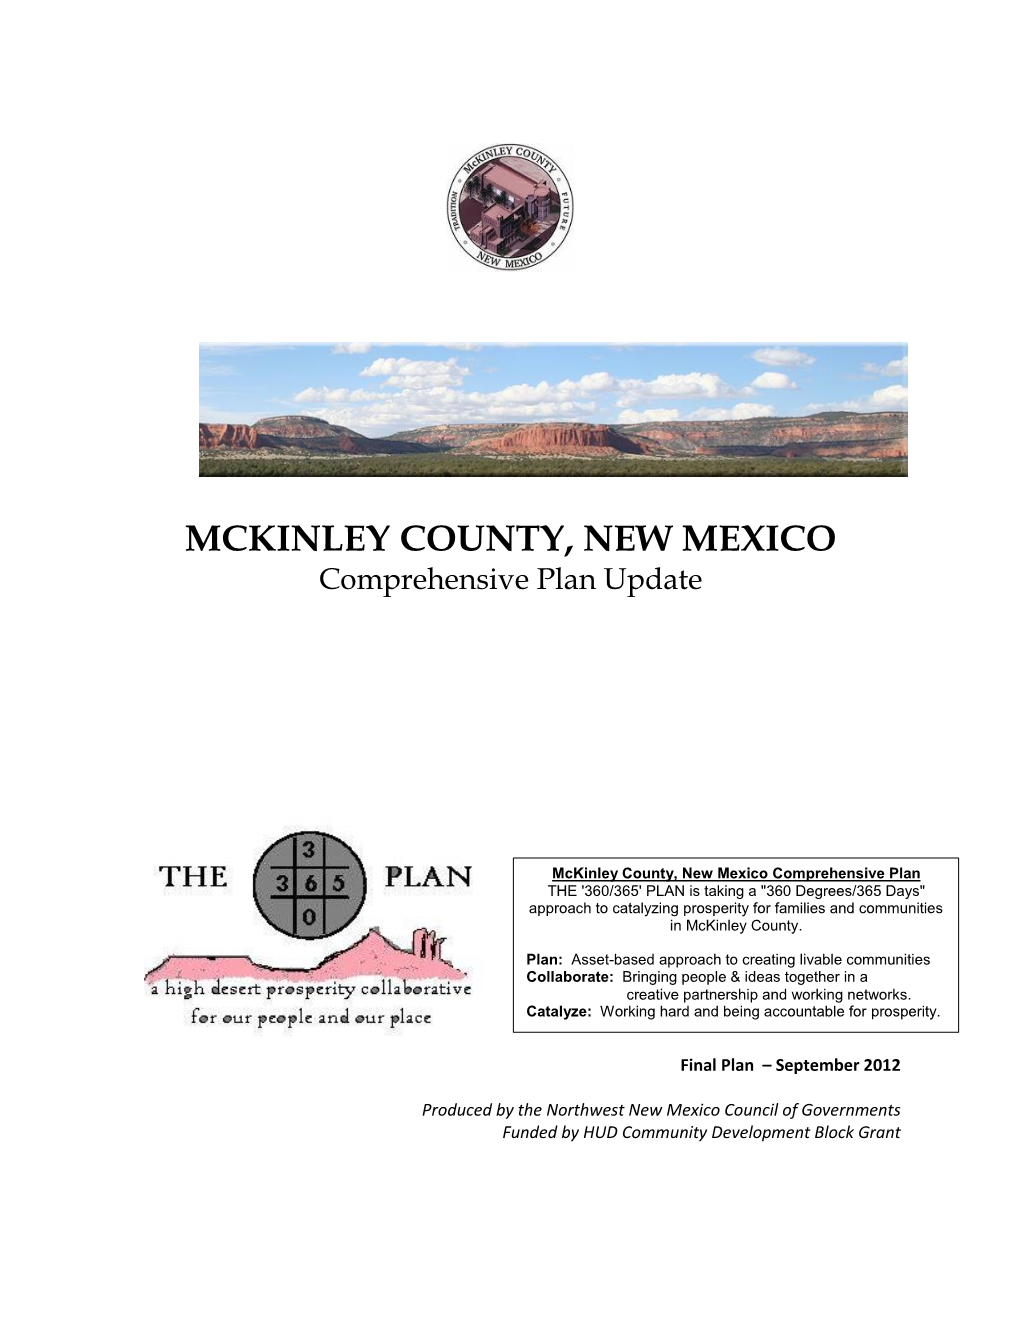 MCKINLEY COUNTY, NEW MEXICO Comprehensive Plan Update